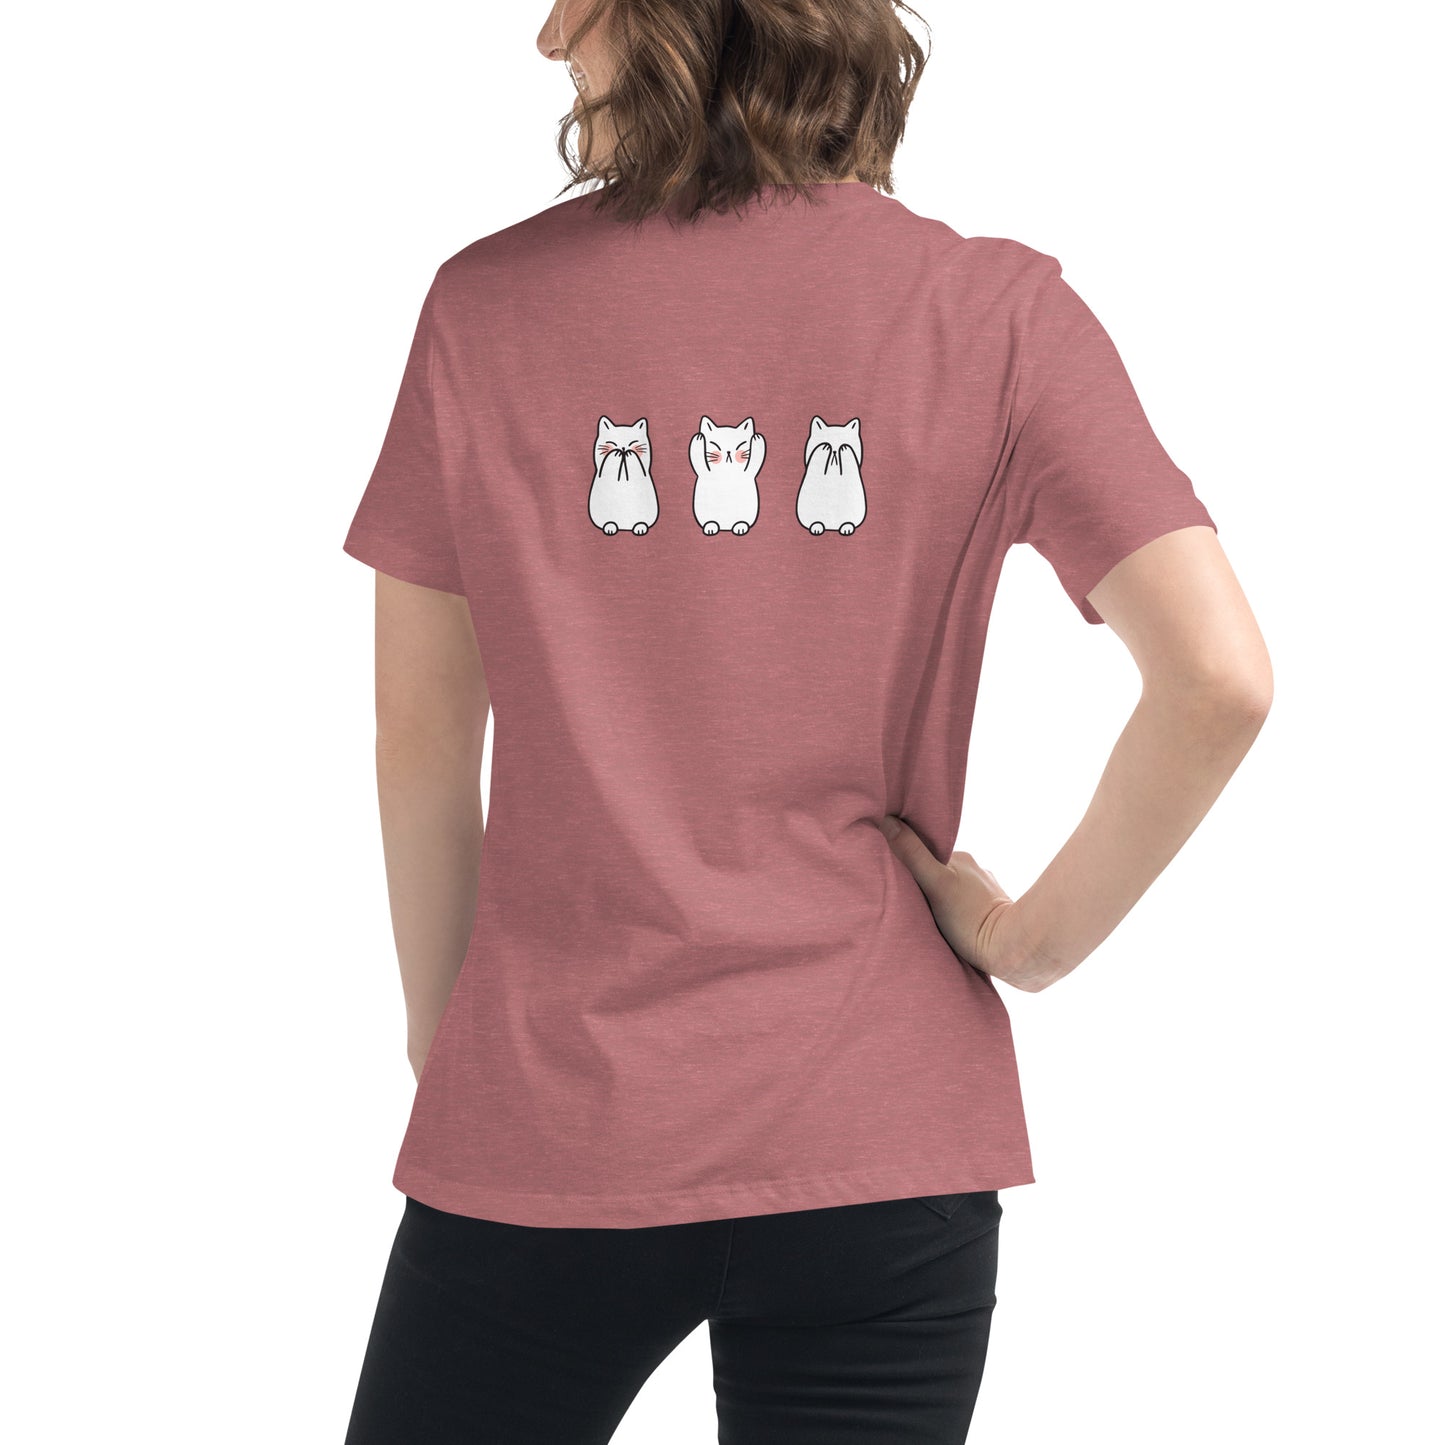 Comfy T-shirts Angry Cat